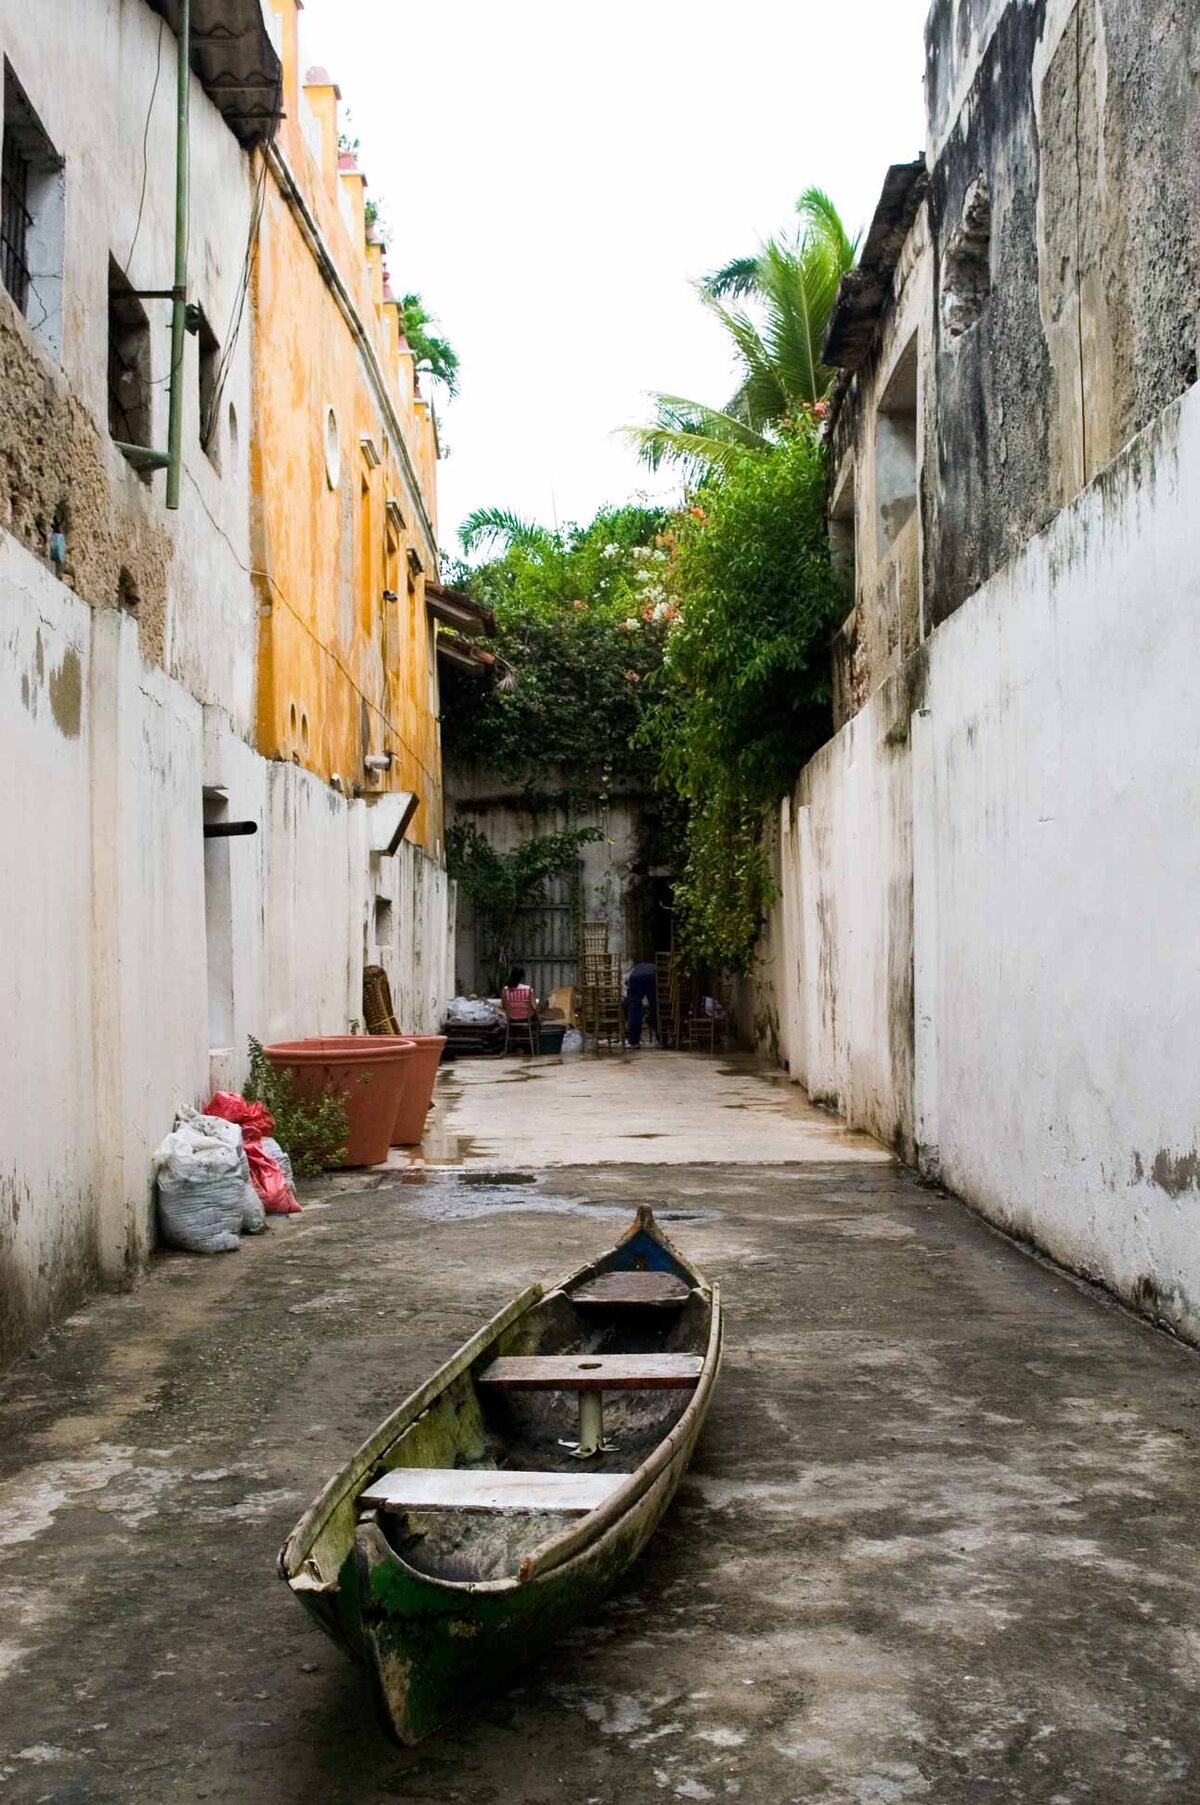 A canoe lies in an alleyway in Cartagena. This shows the oddities of the space in an editorial series of images.